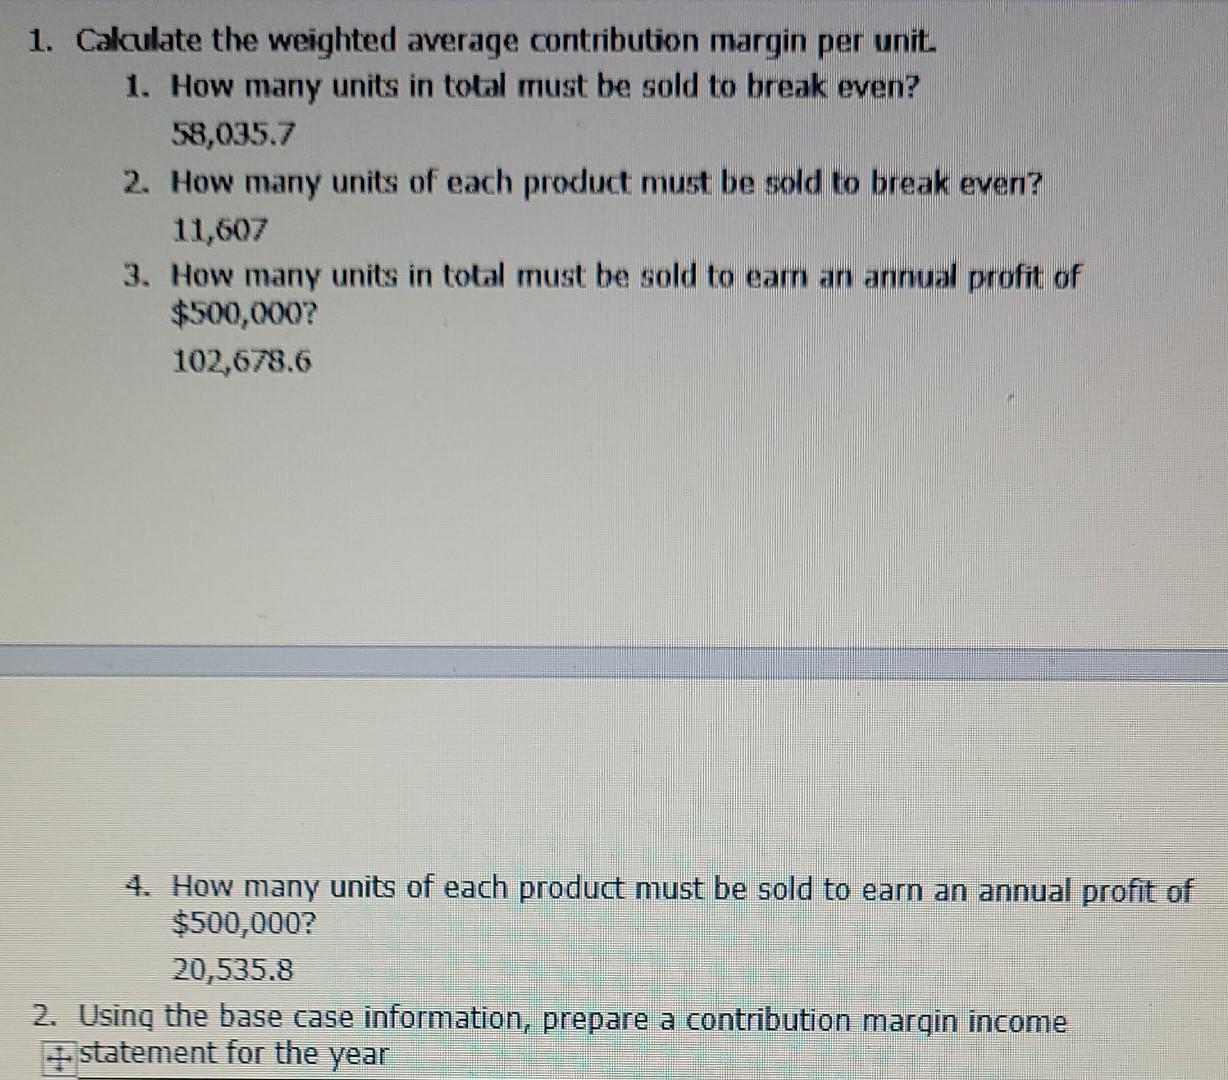 1. Calculate the weighted average contribution margin per unit.1. How many units in total must be sold to break even? ( 58,